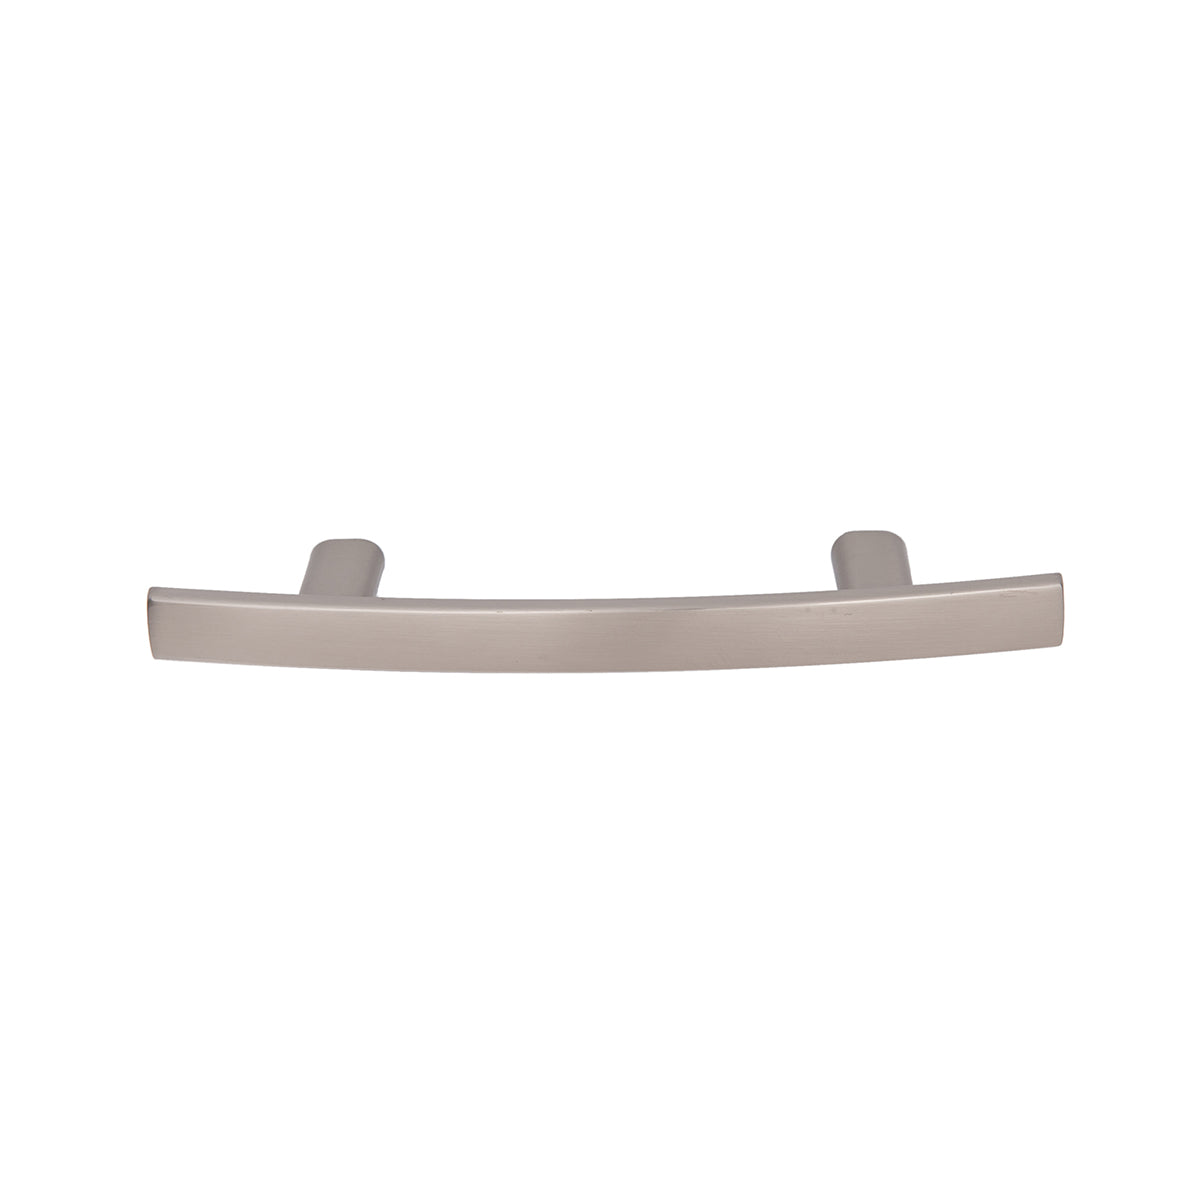 South Main Hardware Modern Curved Bar Cabinet Pull, 5-1/4" Length (3" Hole Center), Satin Nickel